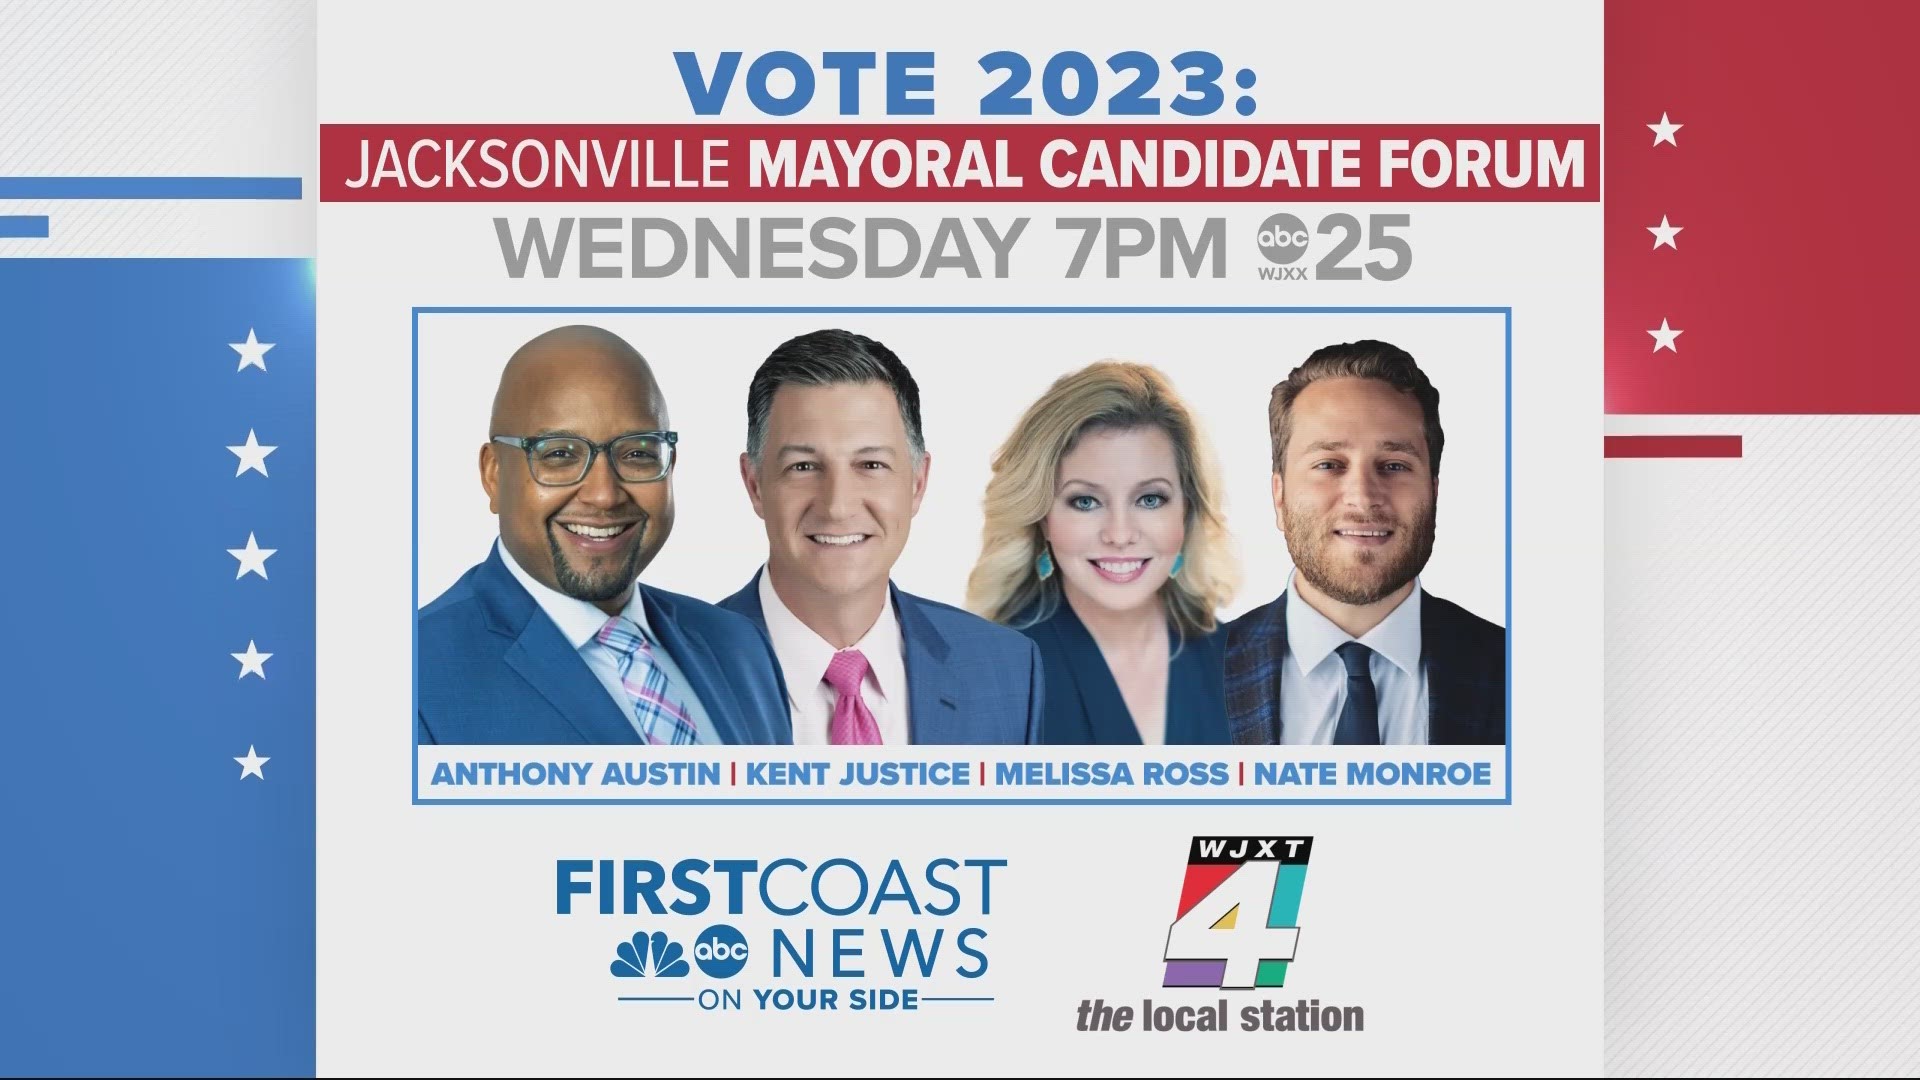 The panel includes Anthony Austin of First Coast News, Kent Justice of WJXT, Melissa Ross of WJCT 89.9 and Nate Monroe of the Florida Times Union